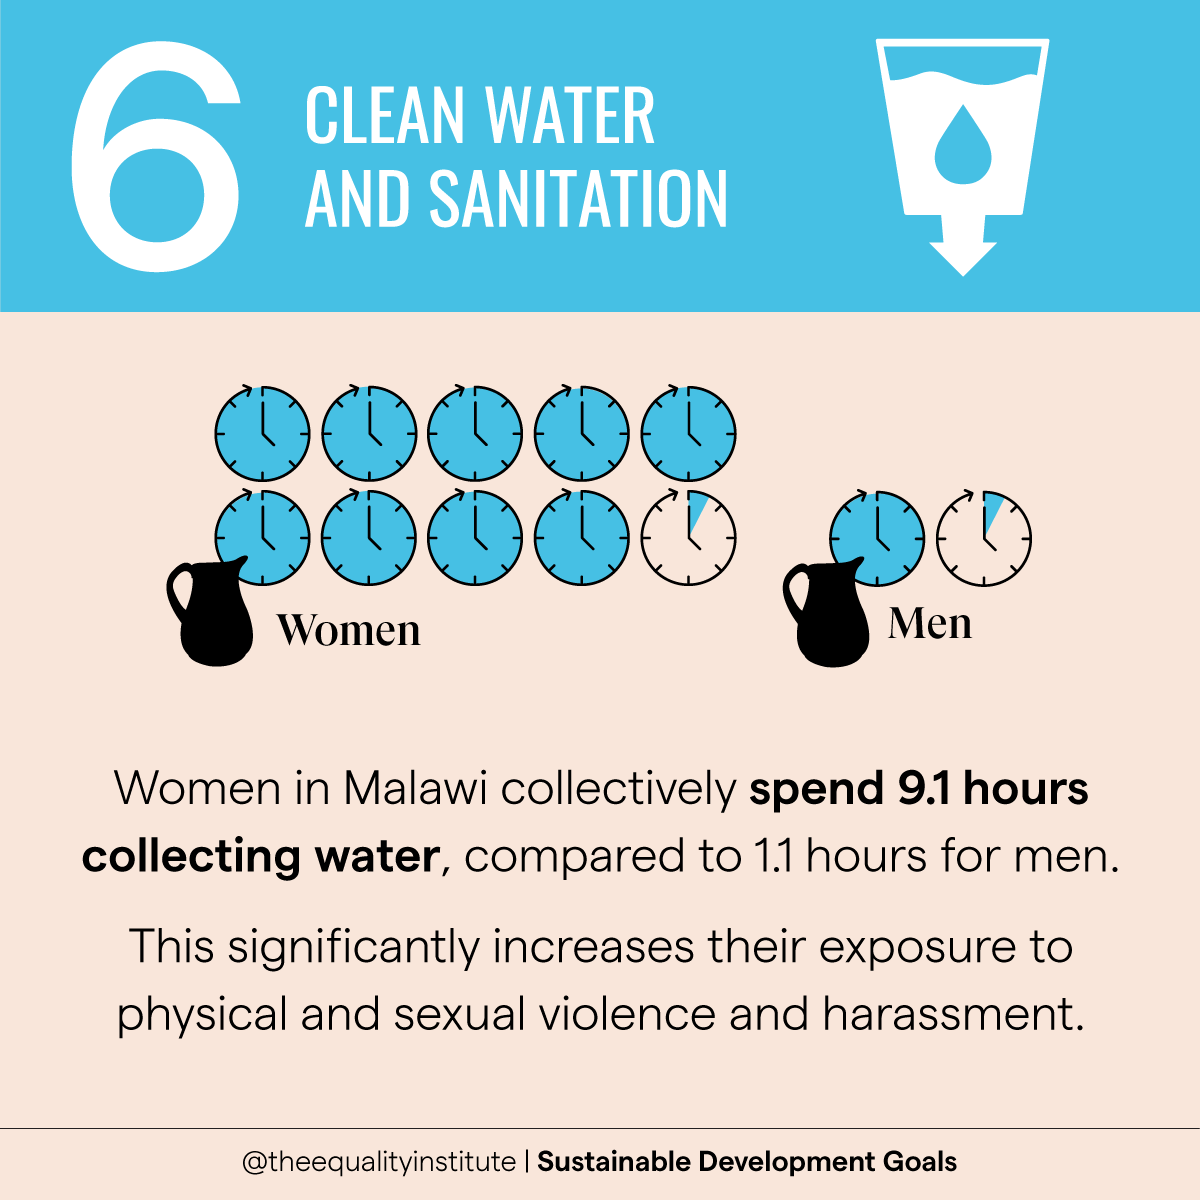 Women are often vulnerable to violence when they travel long distances to collect water, use shared toilets or practise open defecation. In order to achieve #SDG6: we must take into account, and address, gender inequality & violence against women & girls: buff.ly/3F9fYk4